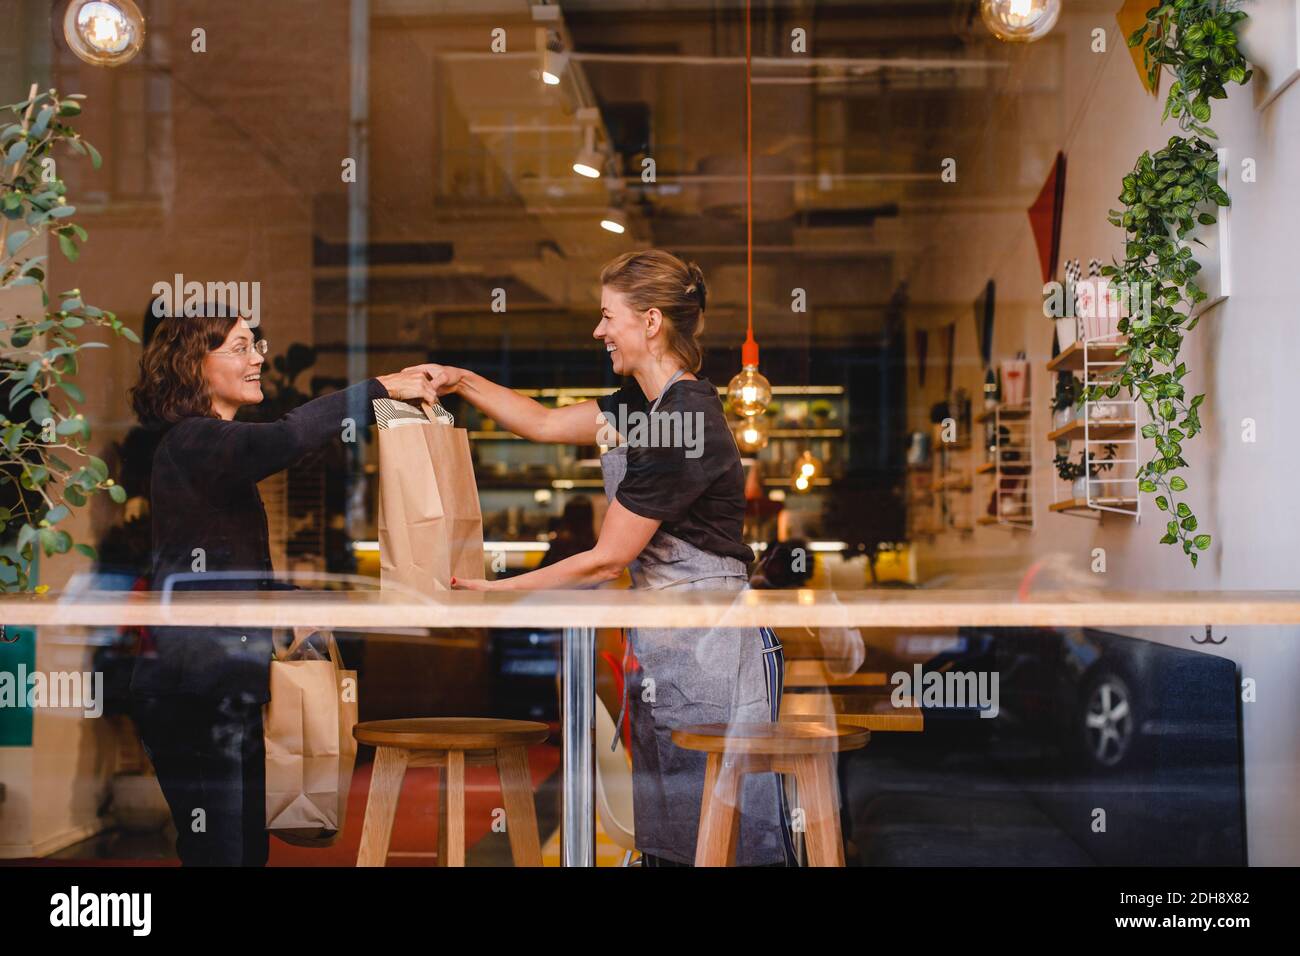 Side view of smiling saleswoman giving shopping bag to female customer at checkout counter seen through glass window Stock Photo